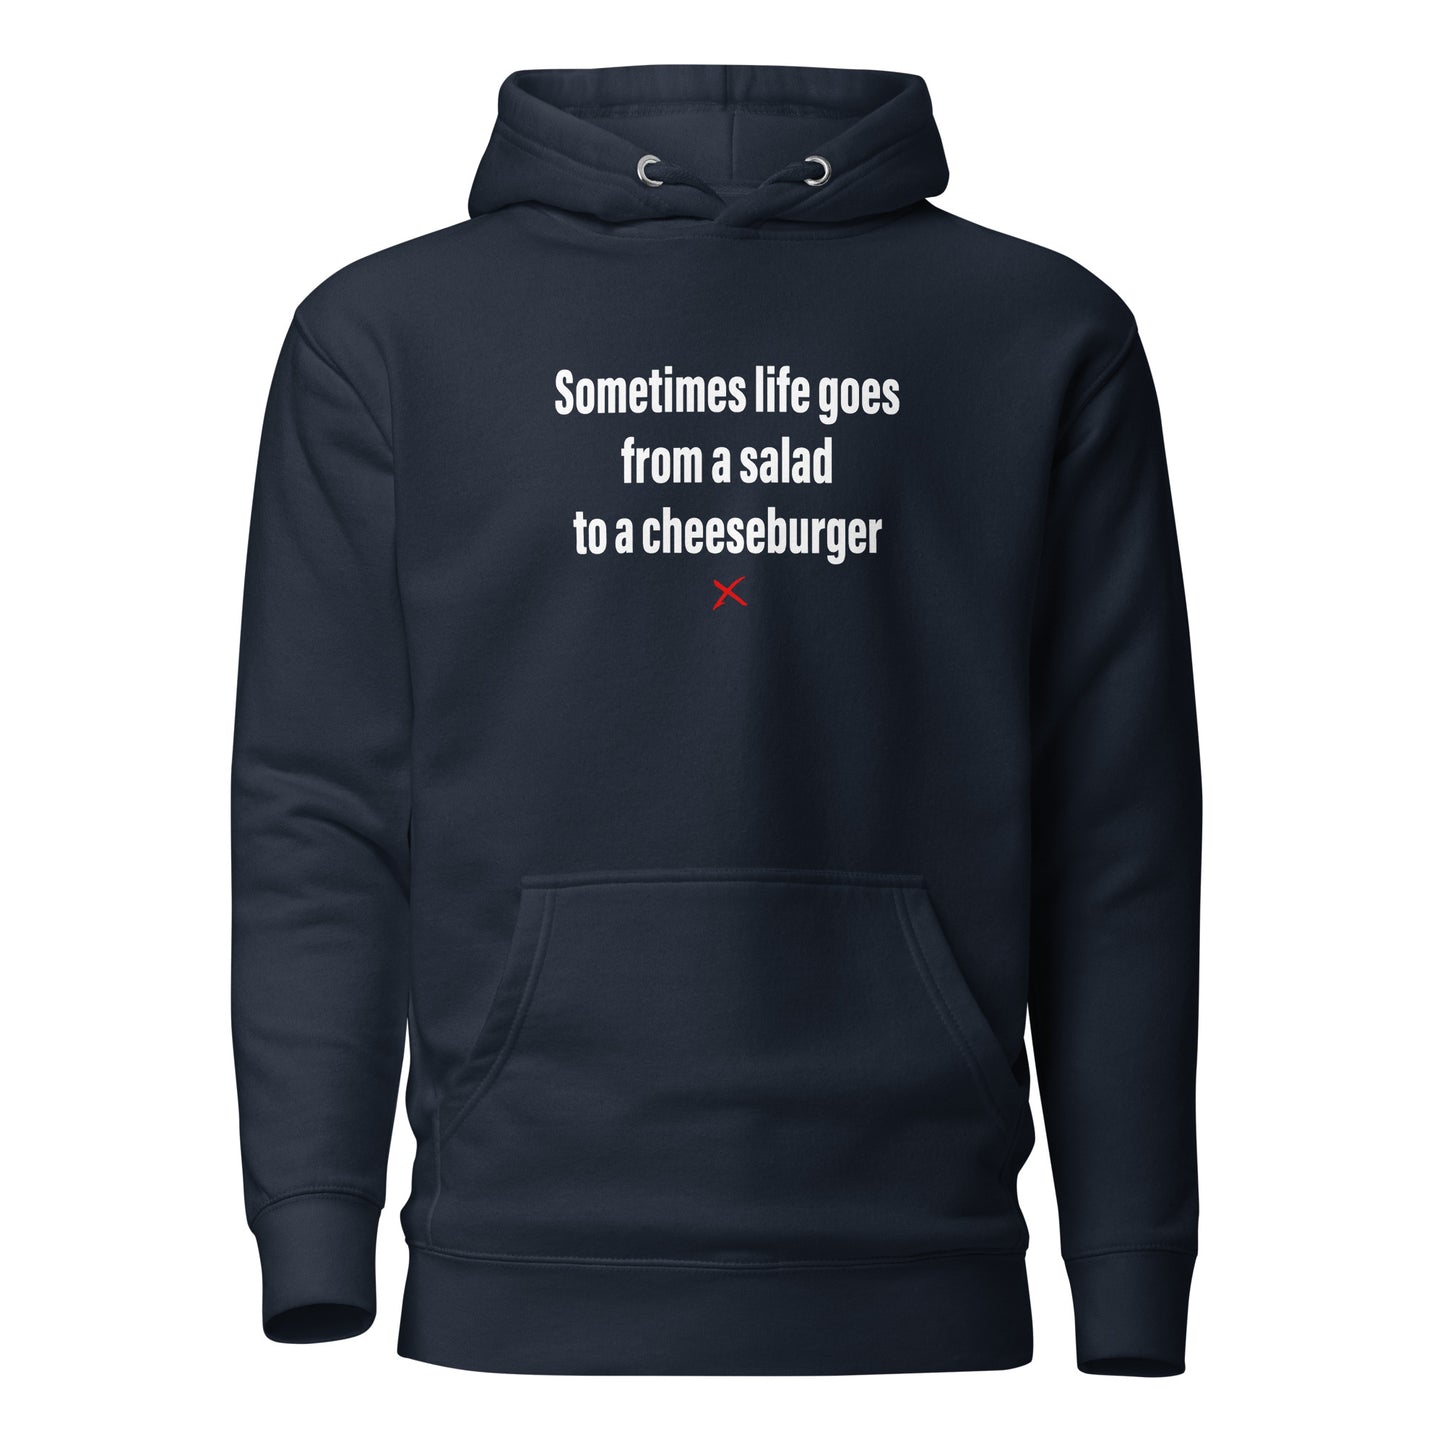 Sometimes life goes from a salad to a cheeseburger - Hoodie